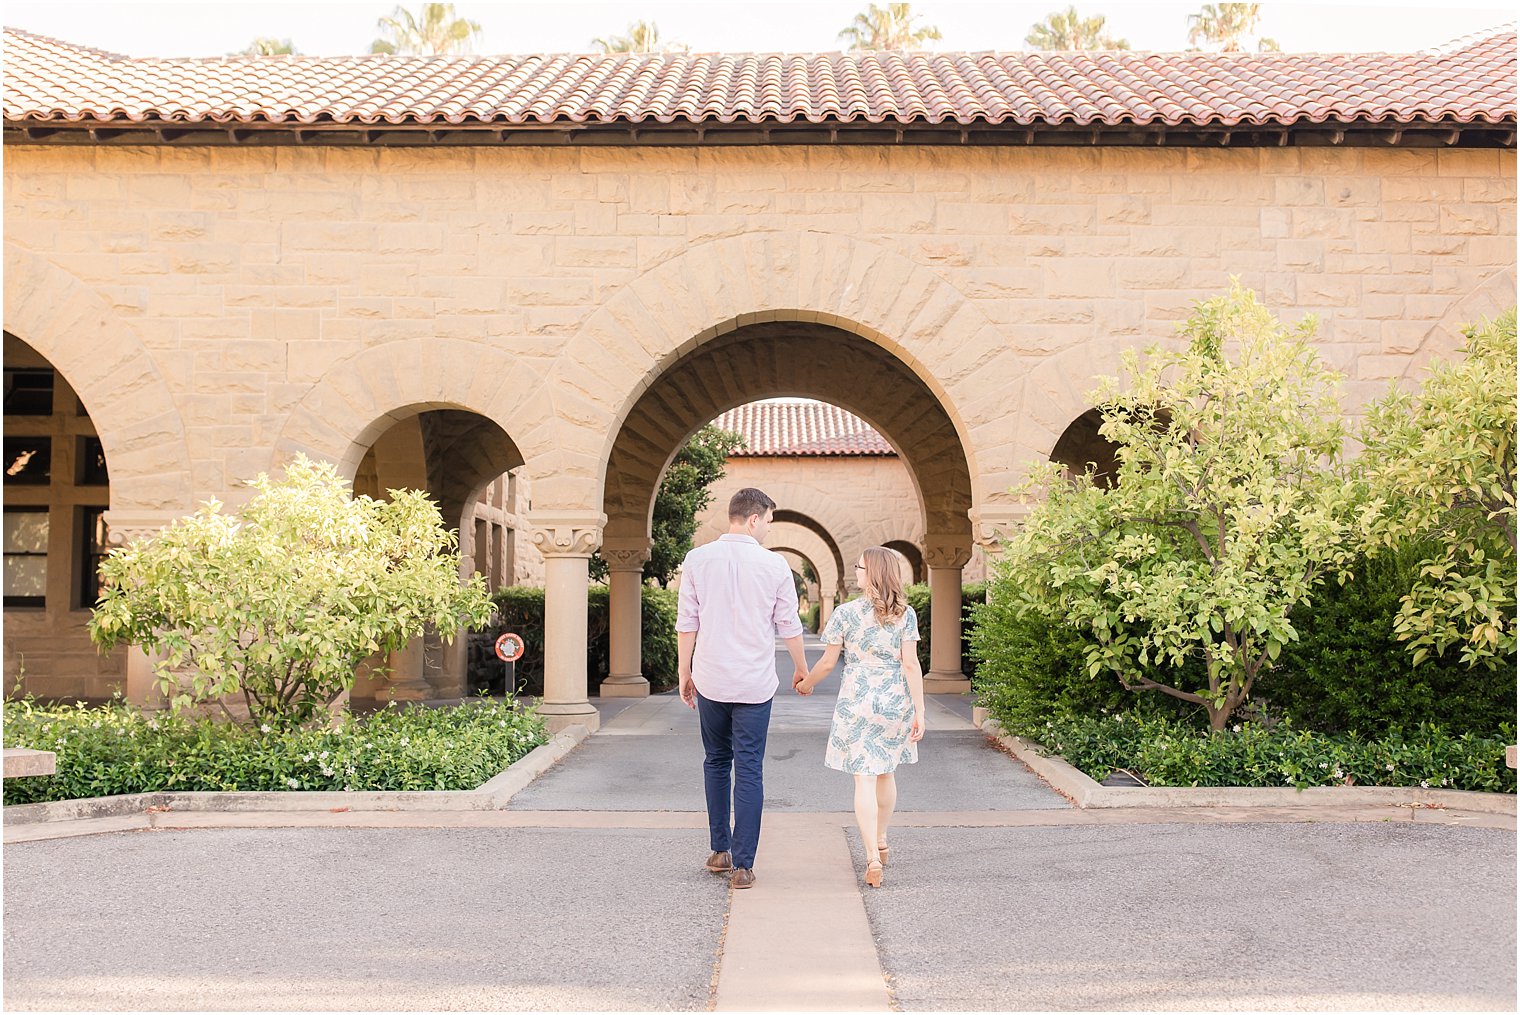 Engagement photos at Stanford University Campus